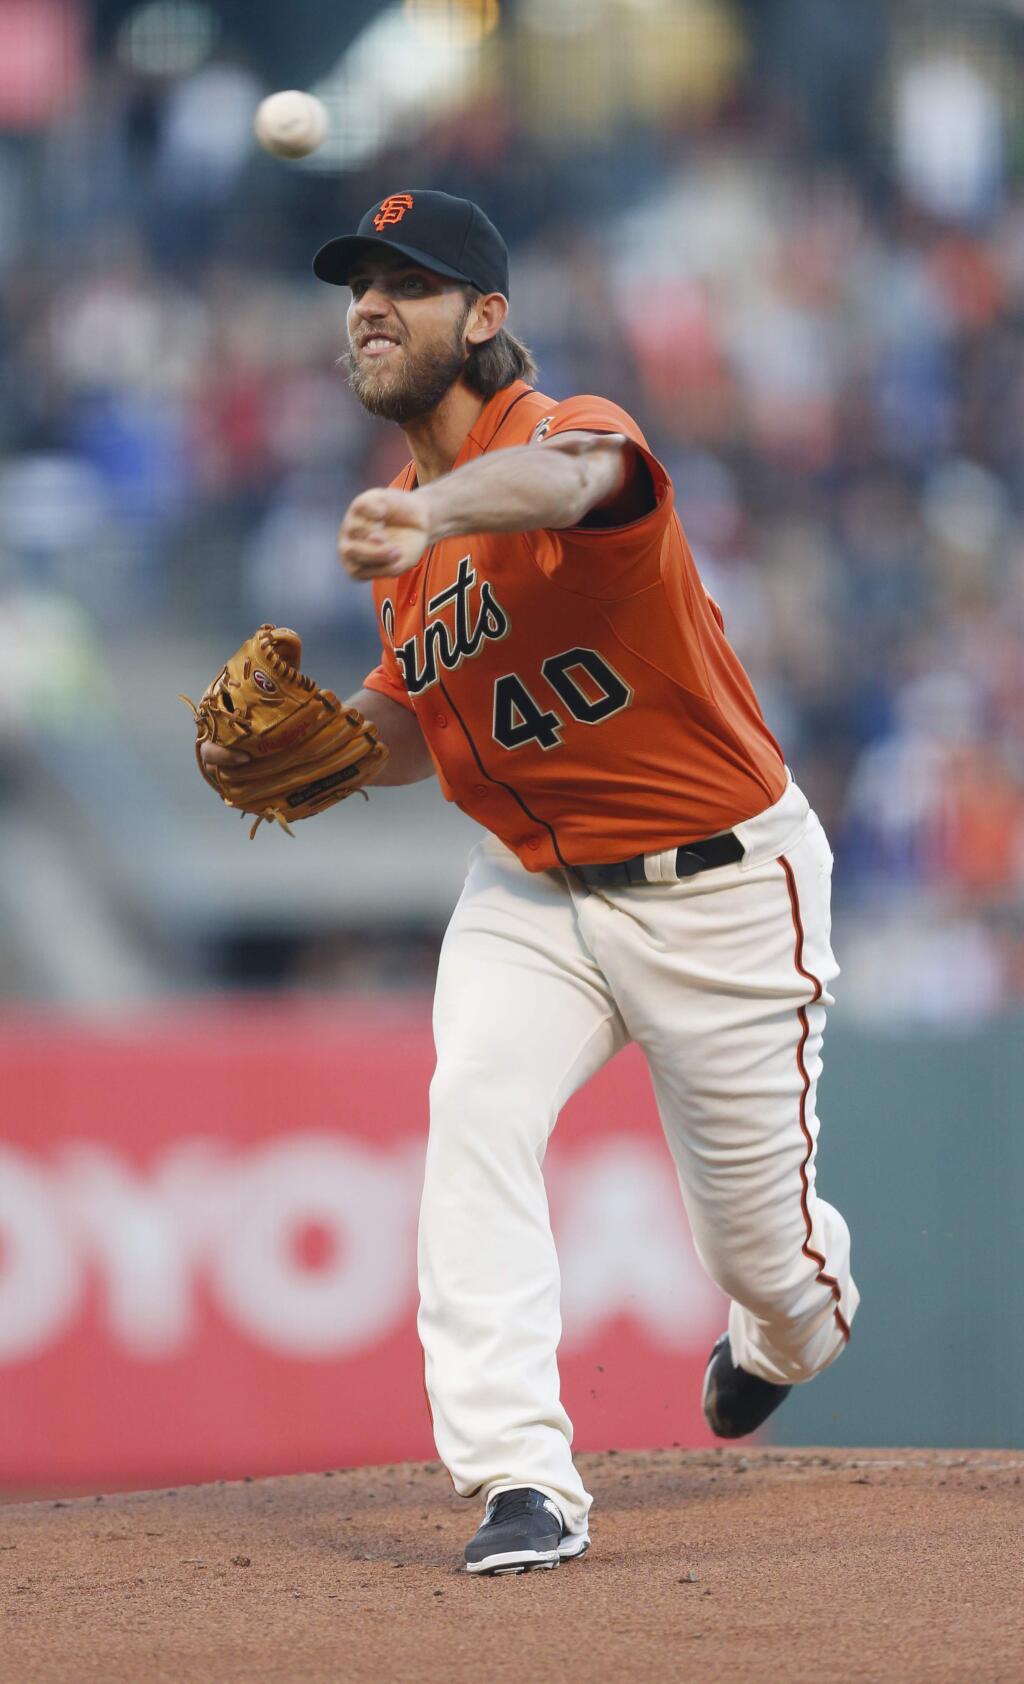 San Francisco Giants pitcher Madison Bumgarner releases the ball during the first inning of a baseball game against the Philadelphia Phillies, Friday, Aug. 15, 2014, in San Francisco. (AP Photo/Beck Diefenbach)